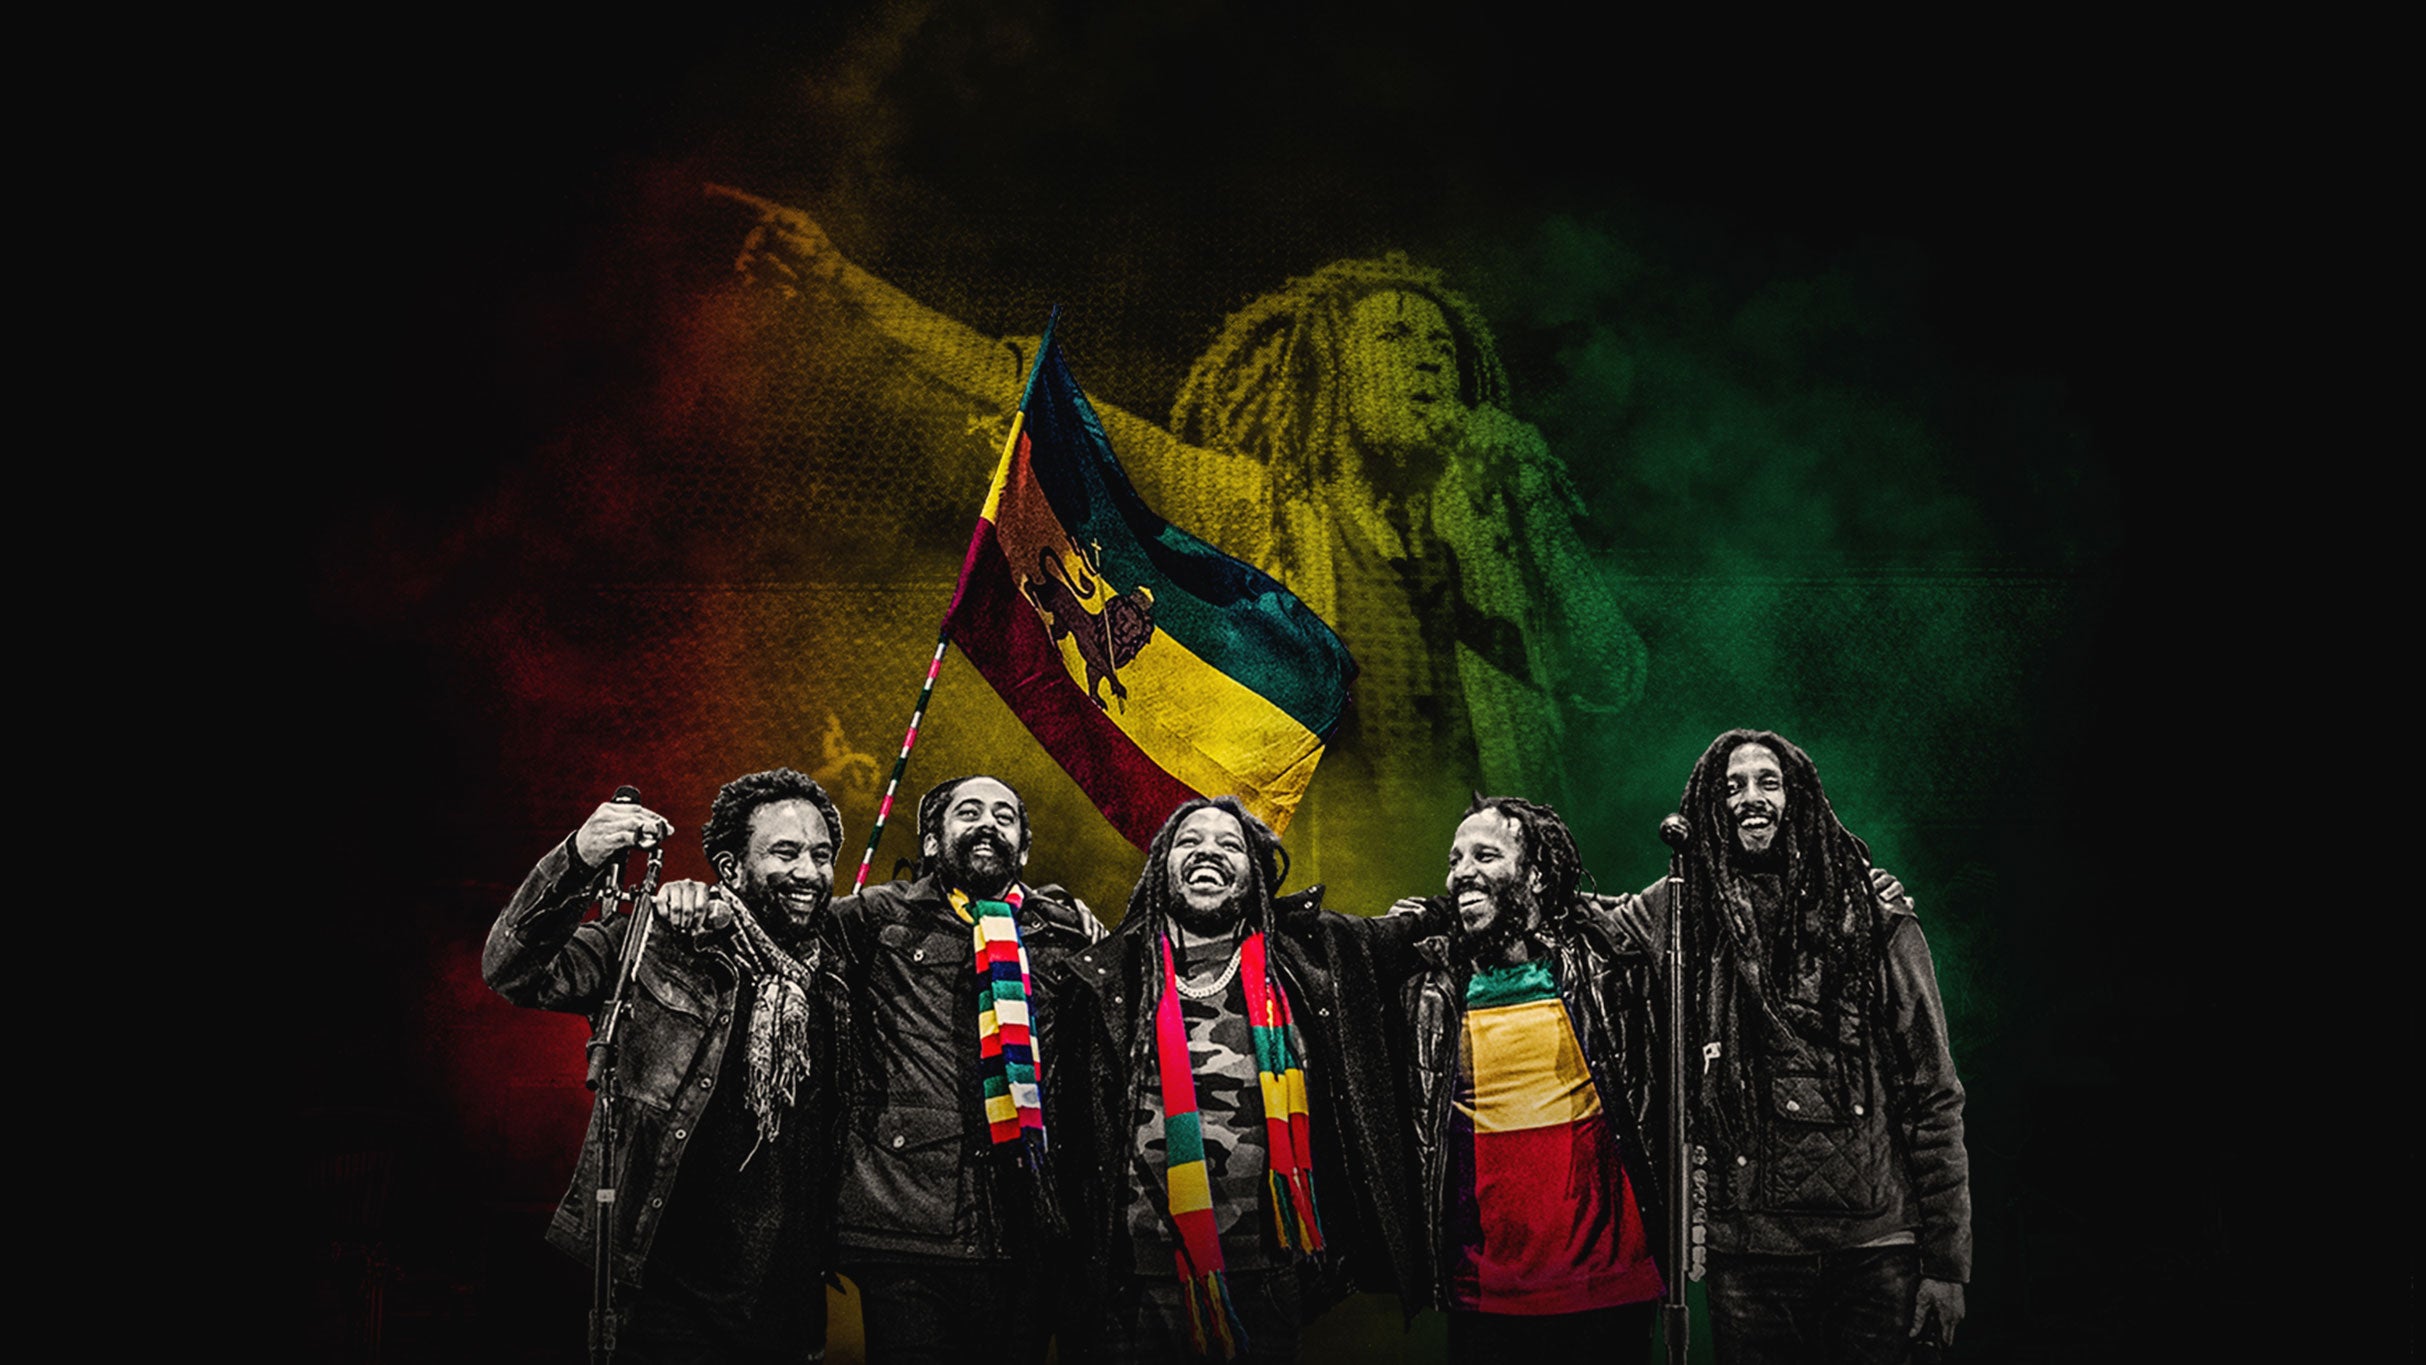 new presale password for The Marley Brothers: The Legacy Tour face value tickets in Toronto